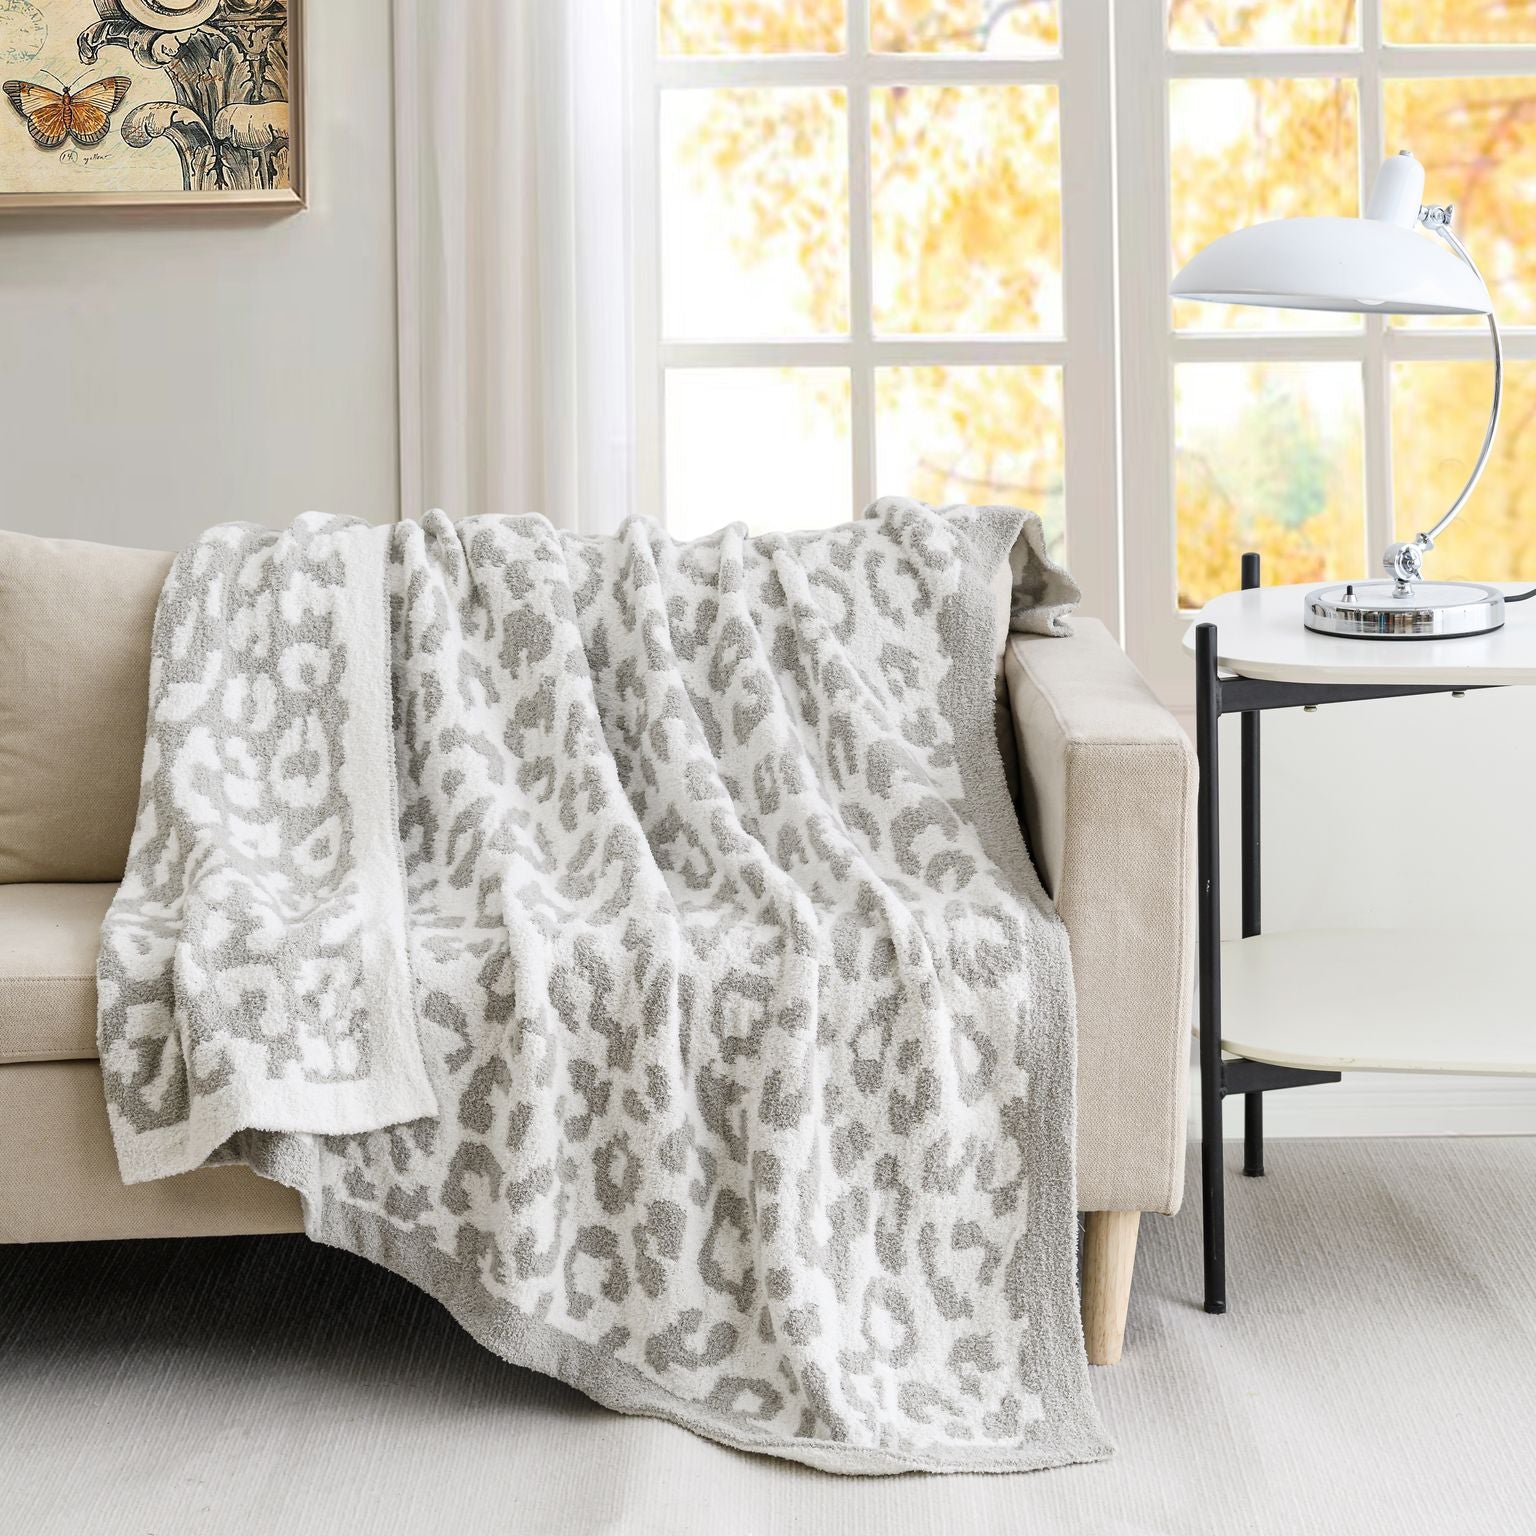 Jacquard Knit Throw Throw Blanket 50 x 60 inches Leopard